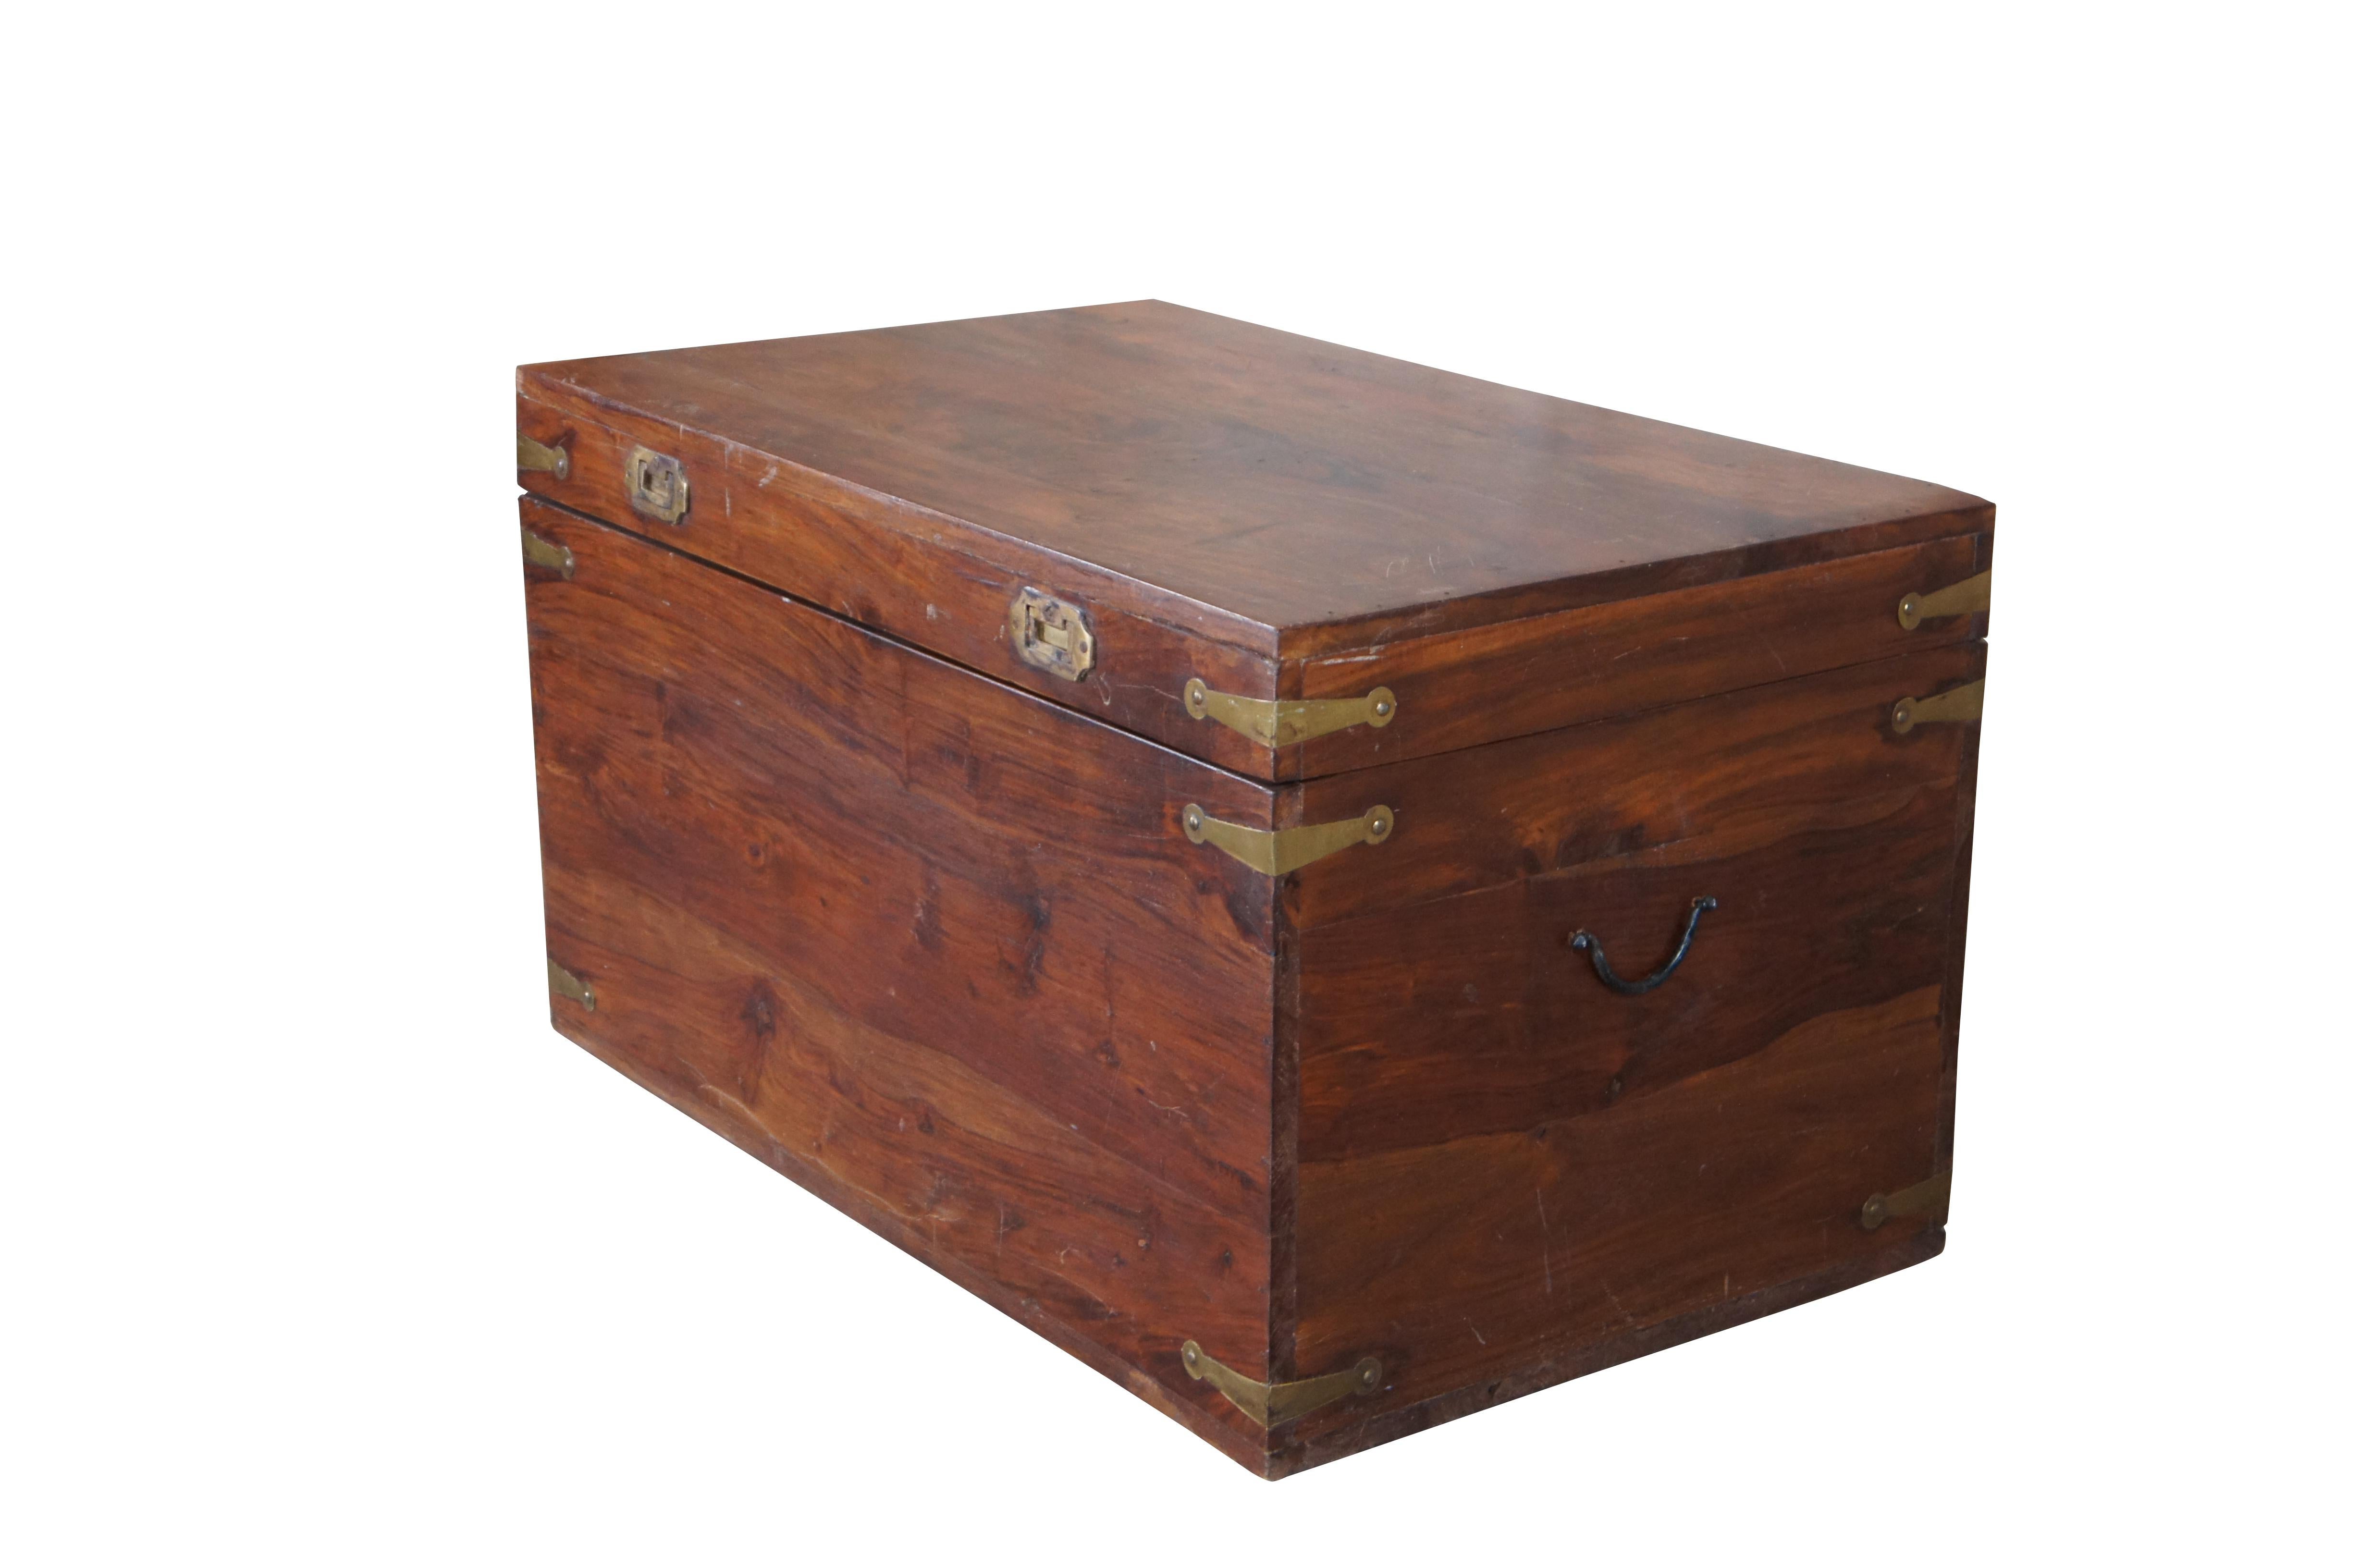 British Colonial style Camphor wood blanket storage chest or coffee table. Features a nice patina with brass accents and iron handles. Brass handles along the front are recessed. Trunk has a stop along the back side to keep the top open. Circa